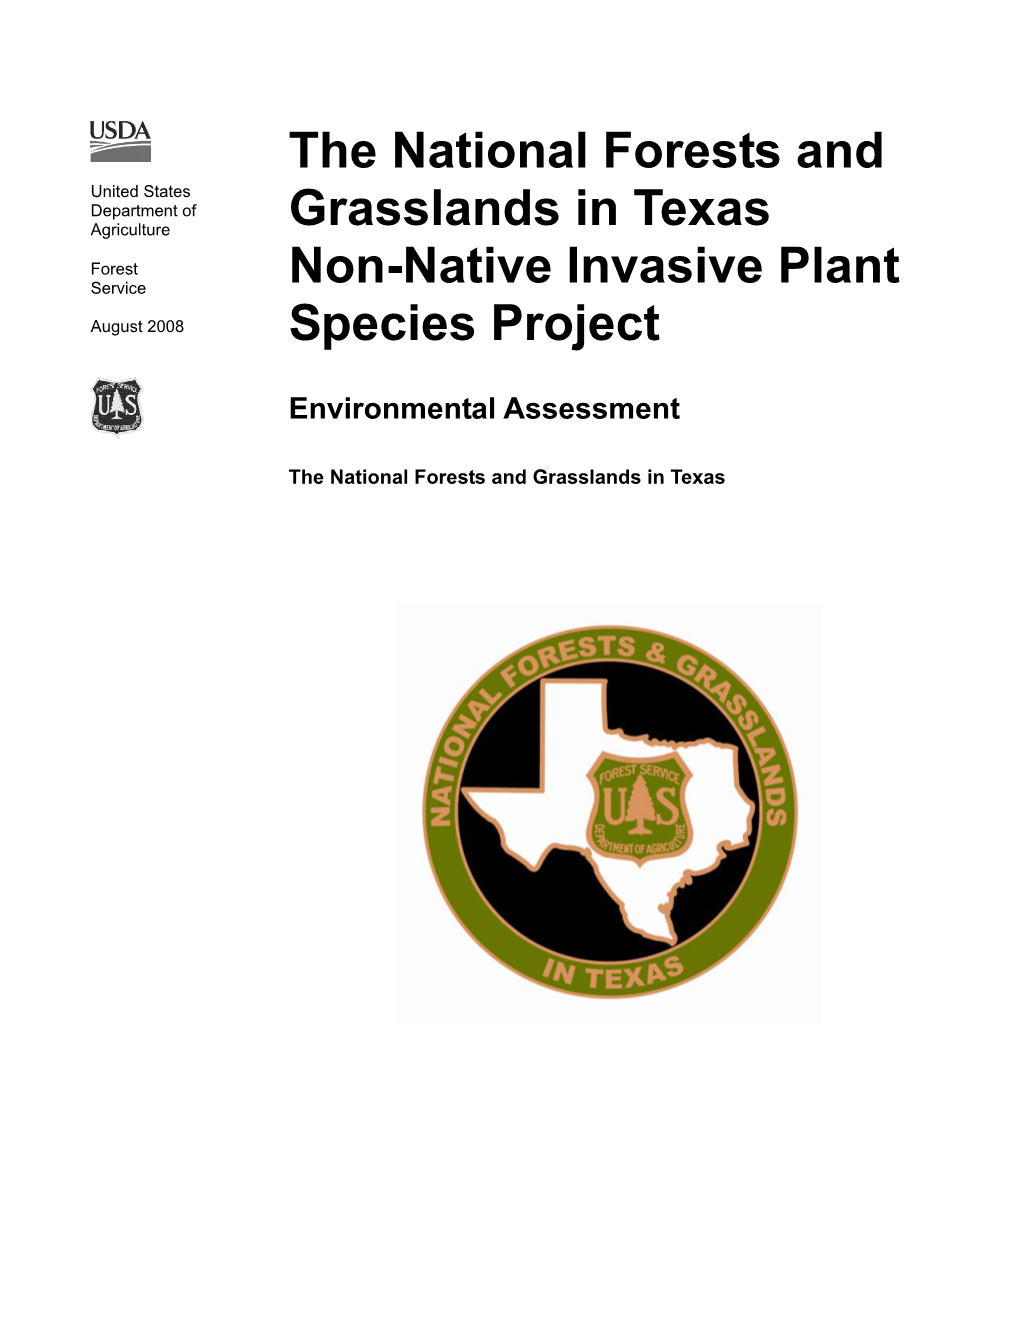 The National Forests and Grasslands in Texas Non-Native Invasive Plant Species Project Environmental Assessment